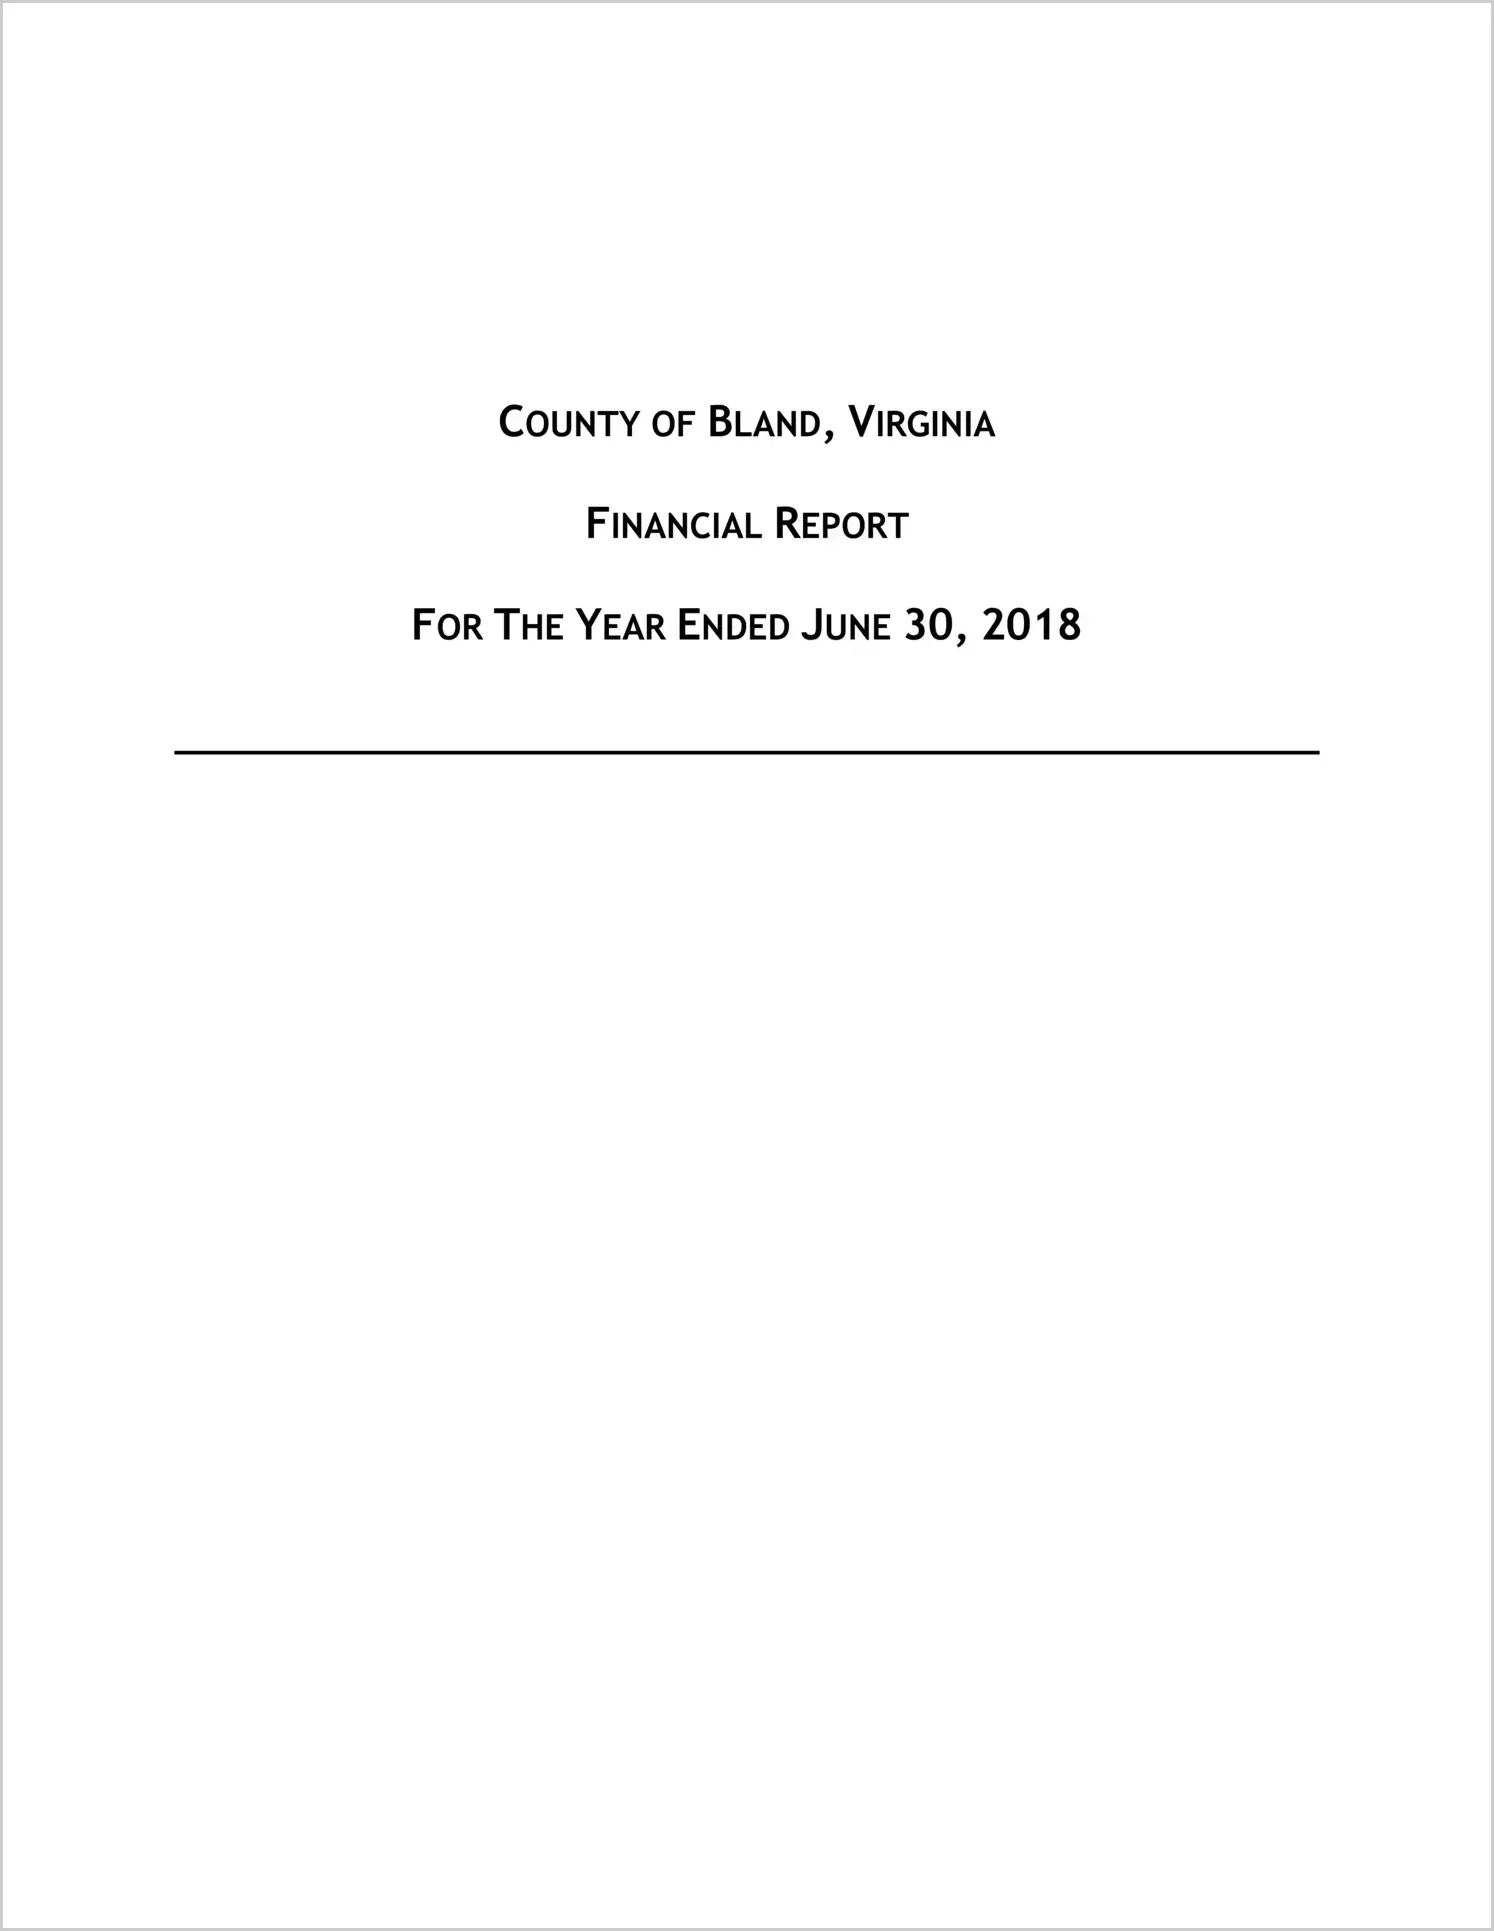 2018 Annual Financial Report for County of Bland